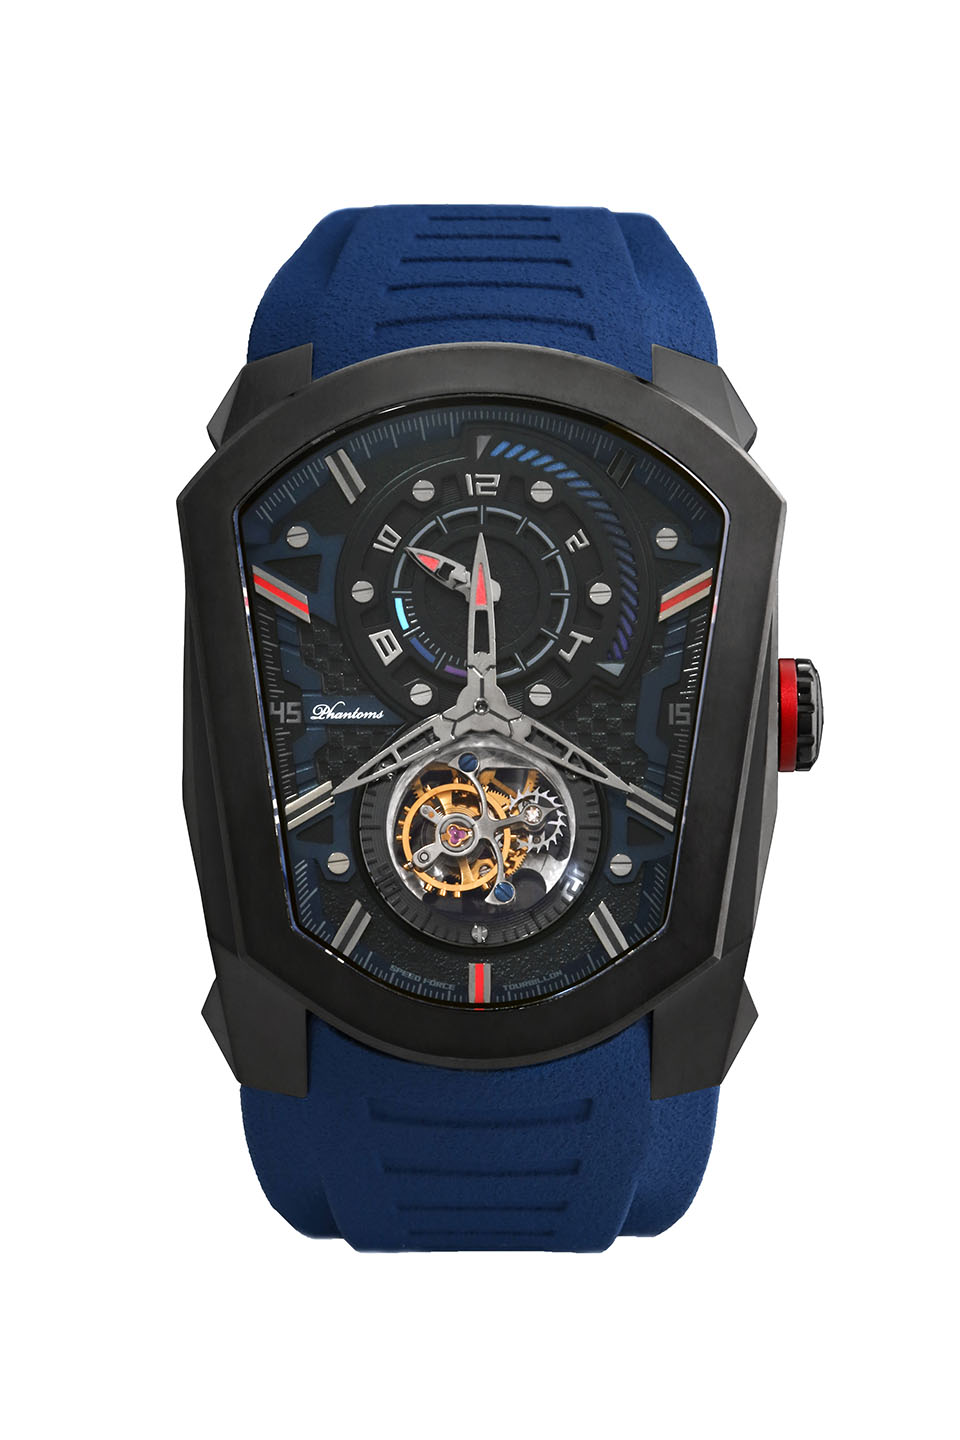 PHTW702-01 negative speed force affordable tourbillon tme coffin mechanical watch